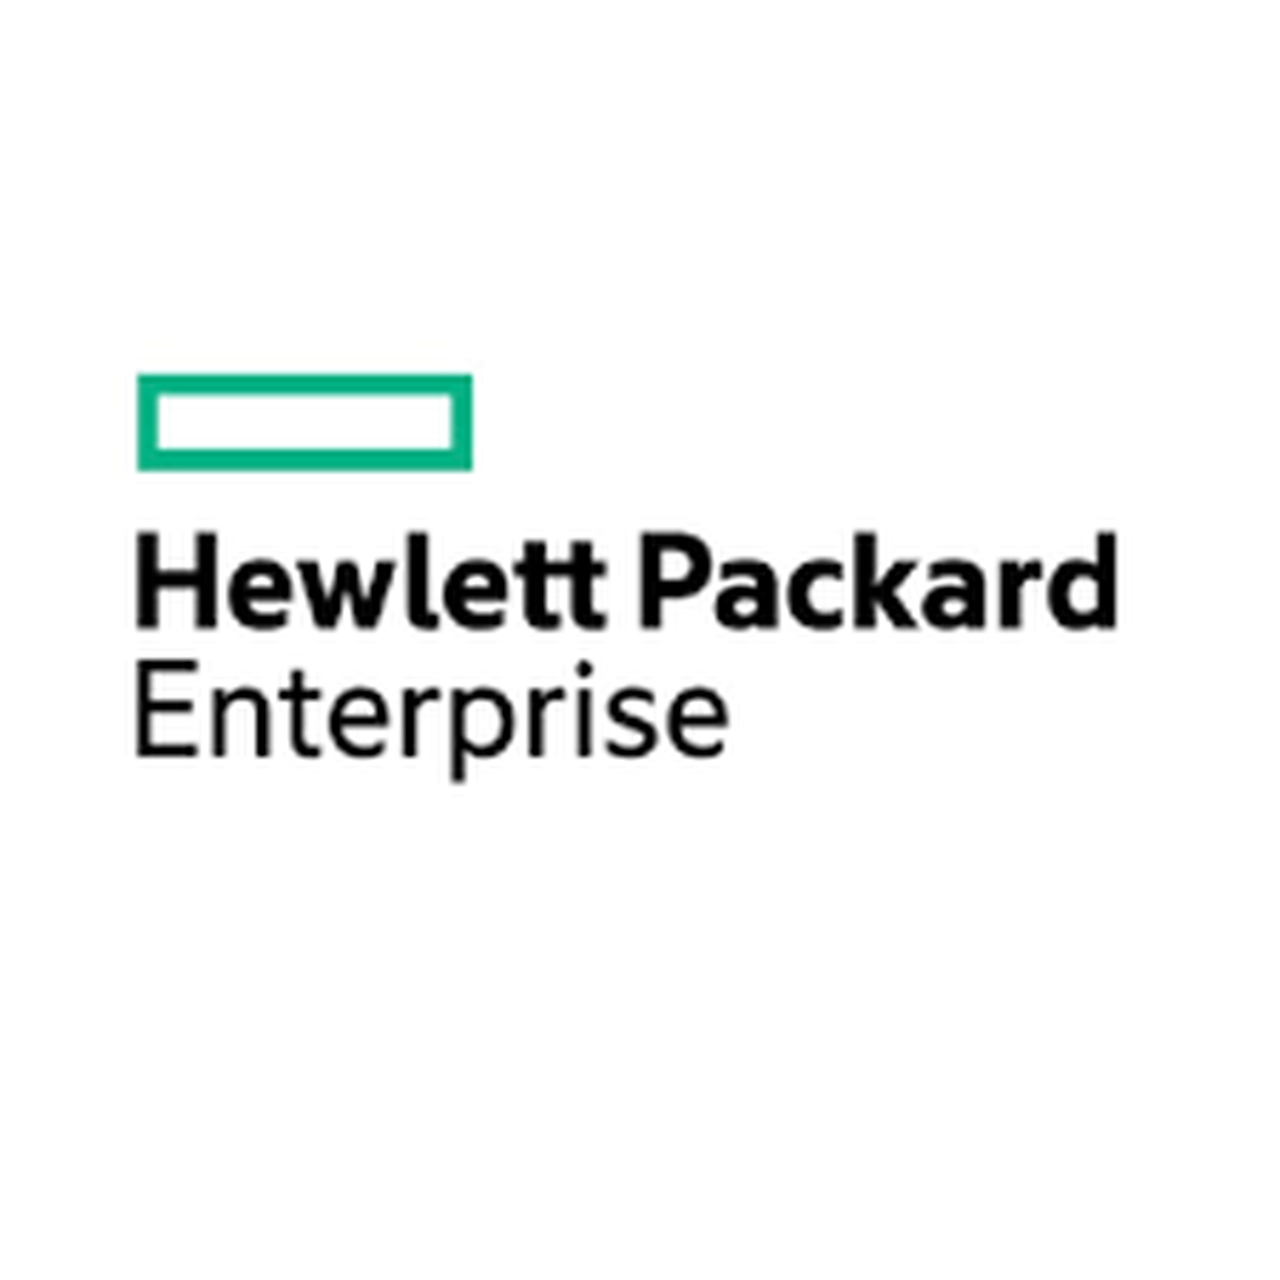 HPE 1 Year Post Warranty Proactive Care, 24x7 BL460cG6 Service